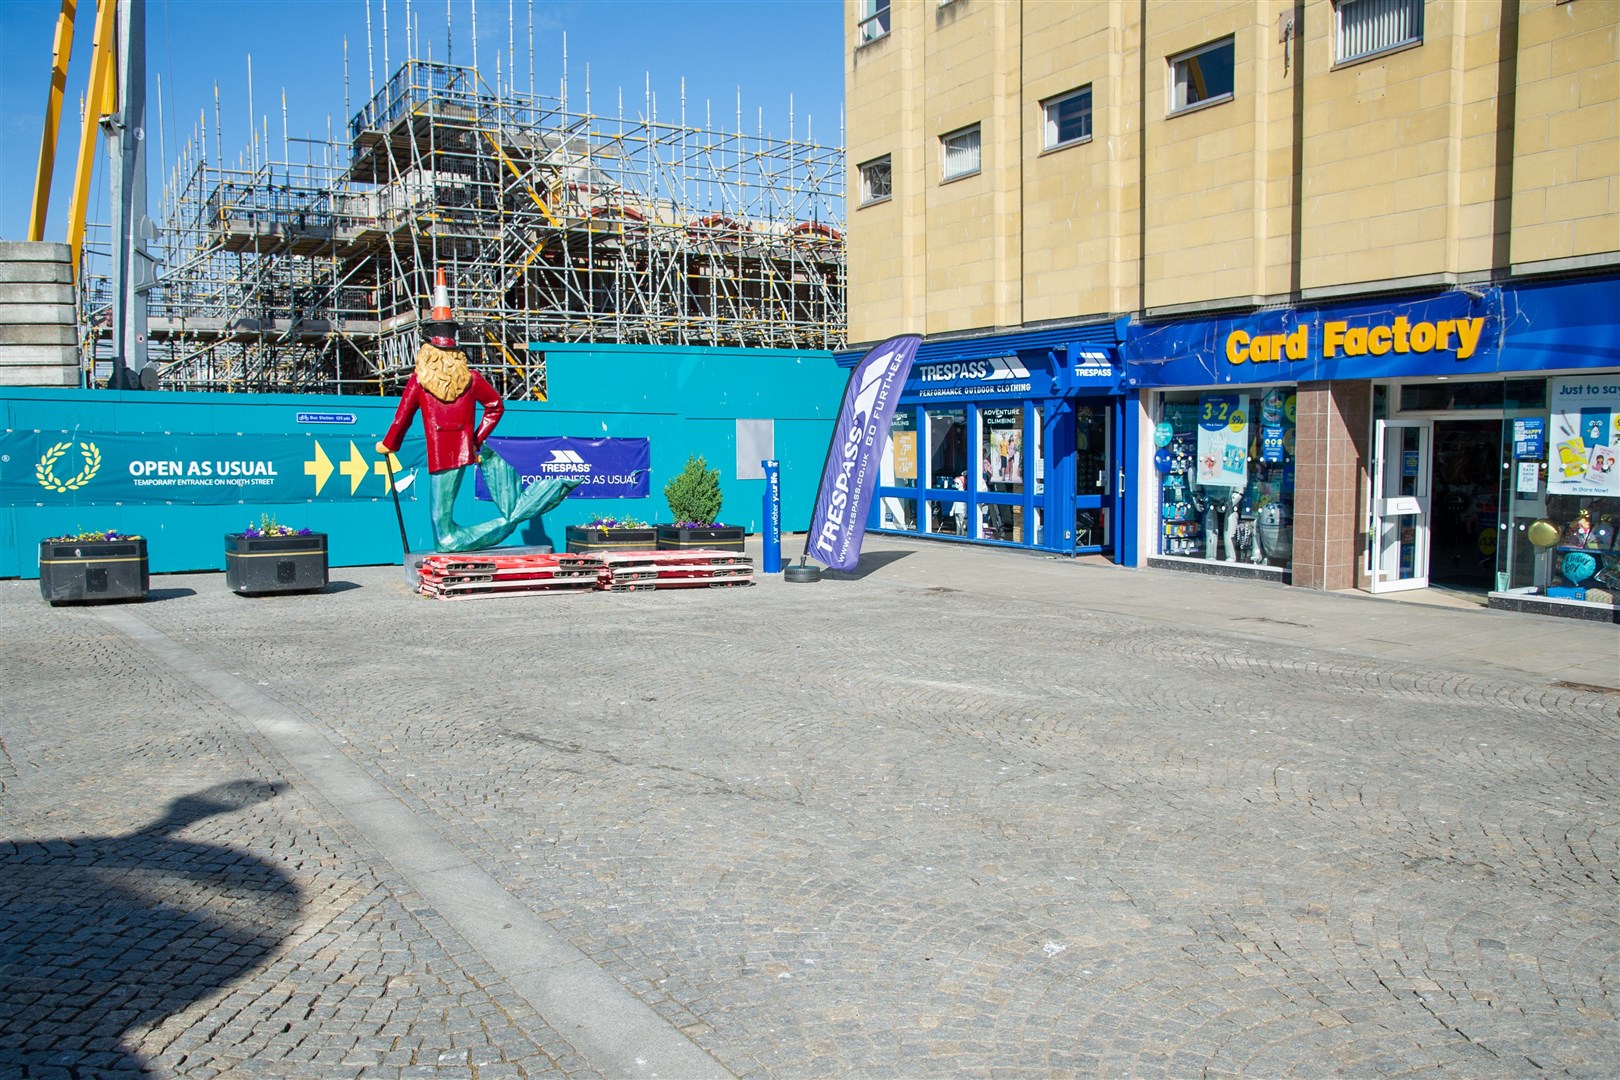 The Poundland store has been undergoing a major renovation in Elgin. Picture: Daniel Forsyth